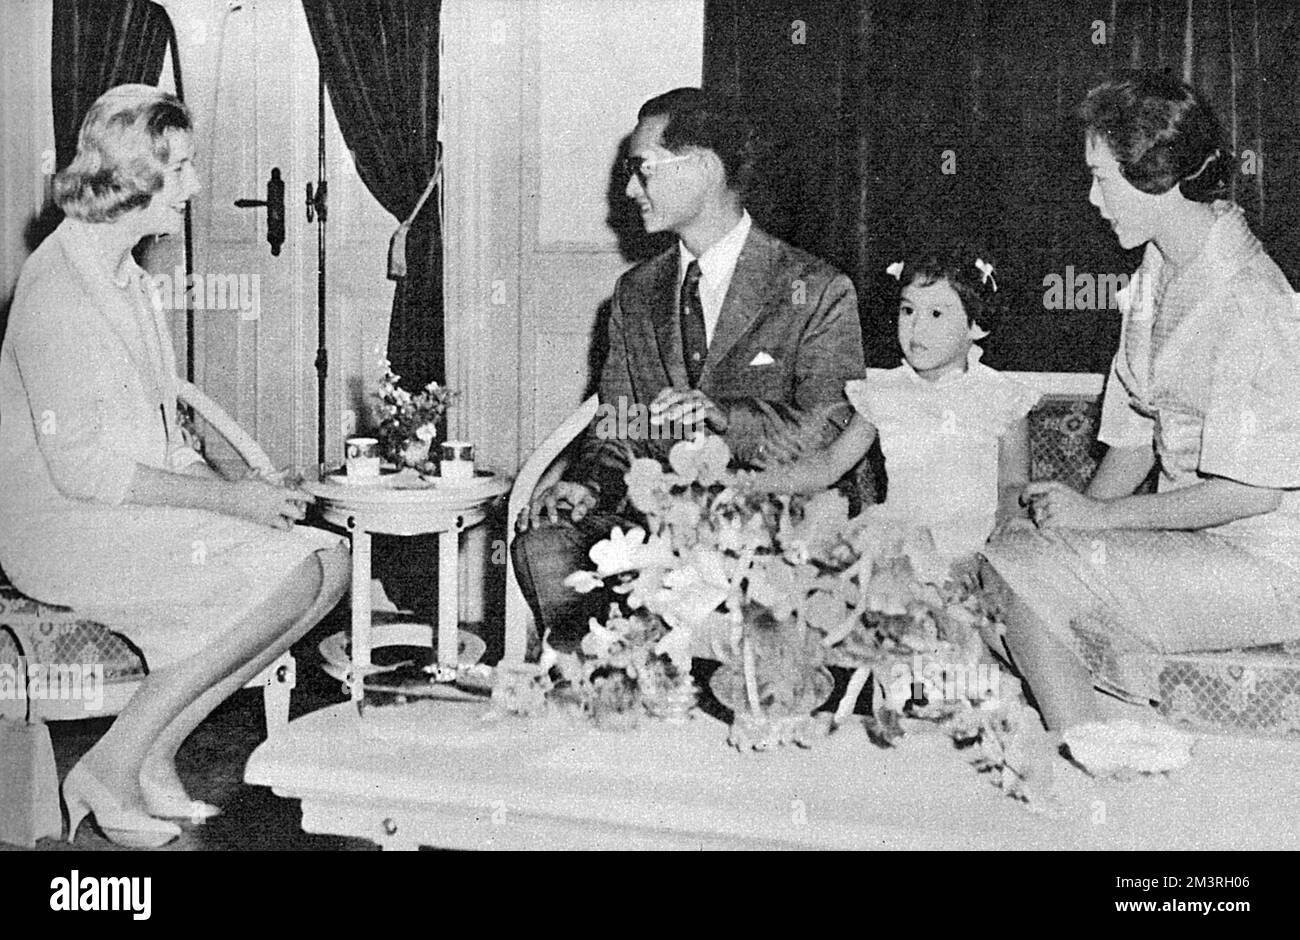 An official state visit to Thailand by Princess Alexandra of Kent (1926-) - pictured with  King Bhumibol Adulyadej (Rama IX) (1927-) and Queen Sirikit (1932-) of Thailand with their eldest daughter Princess Ubolratana Rajakanya (1951-) at the Chitlada Palace in Bangkok.     Date: 1959 Stock Photo